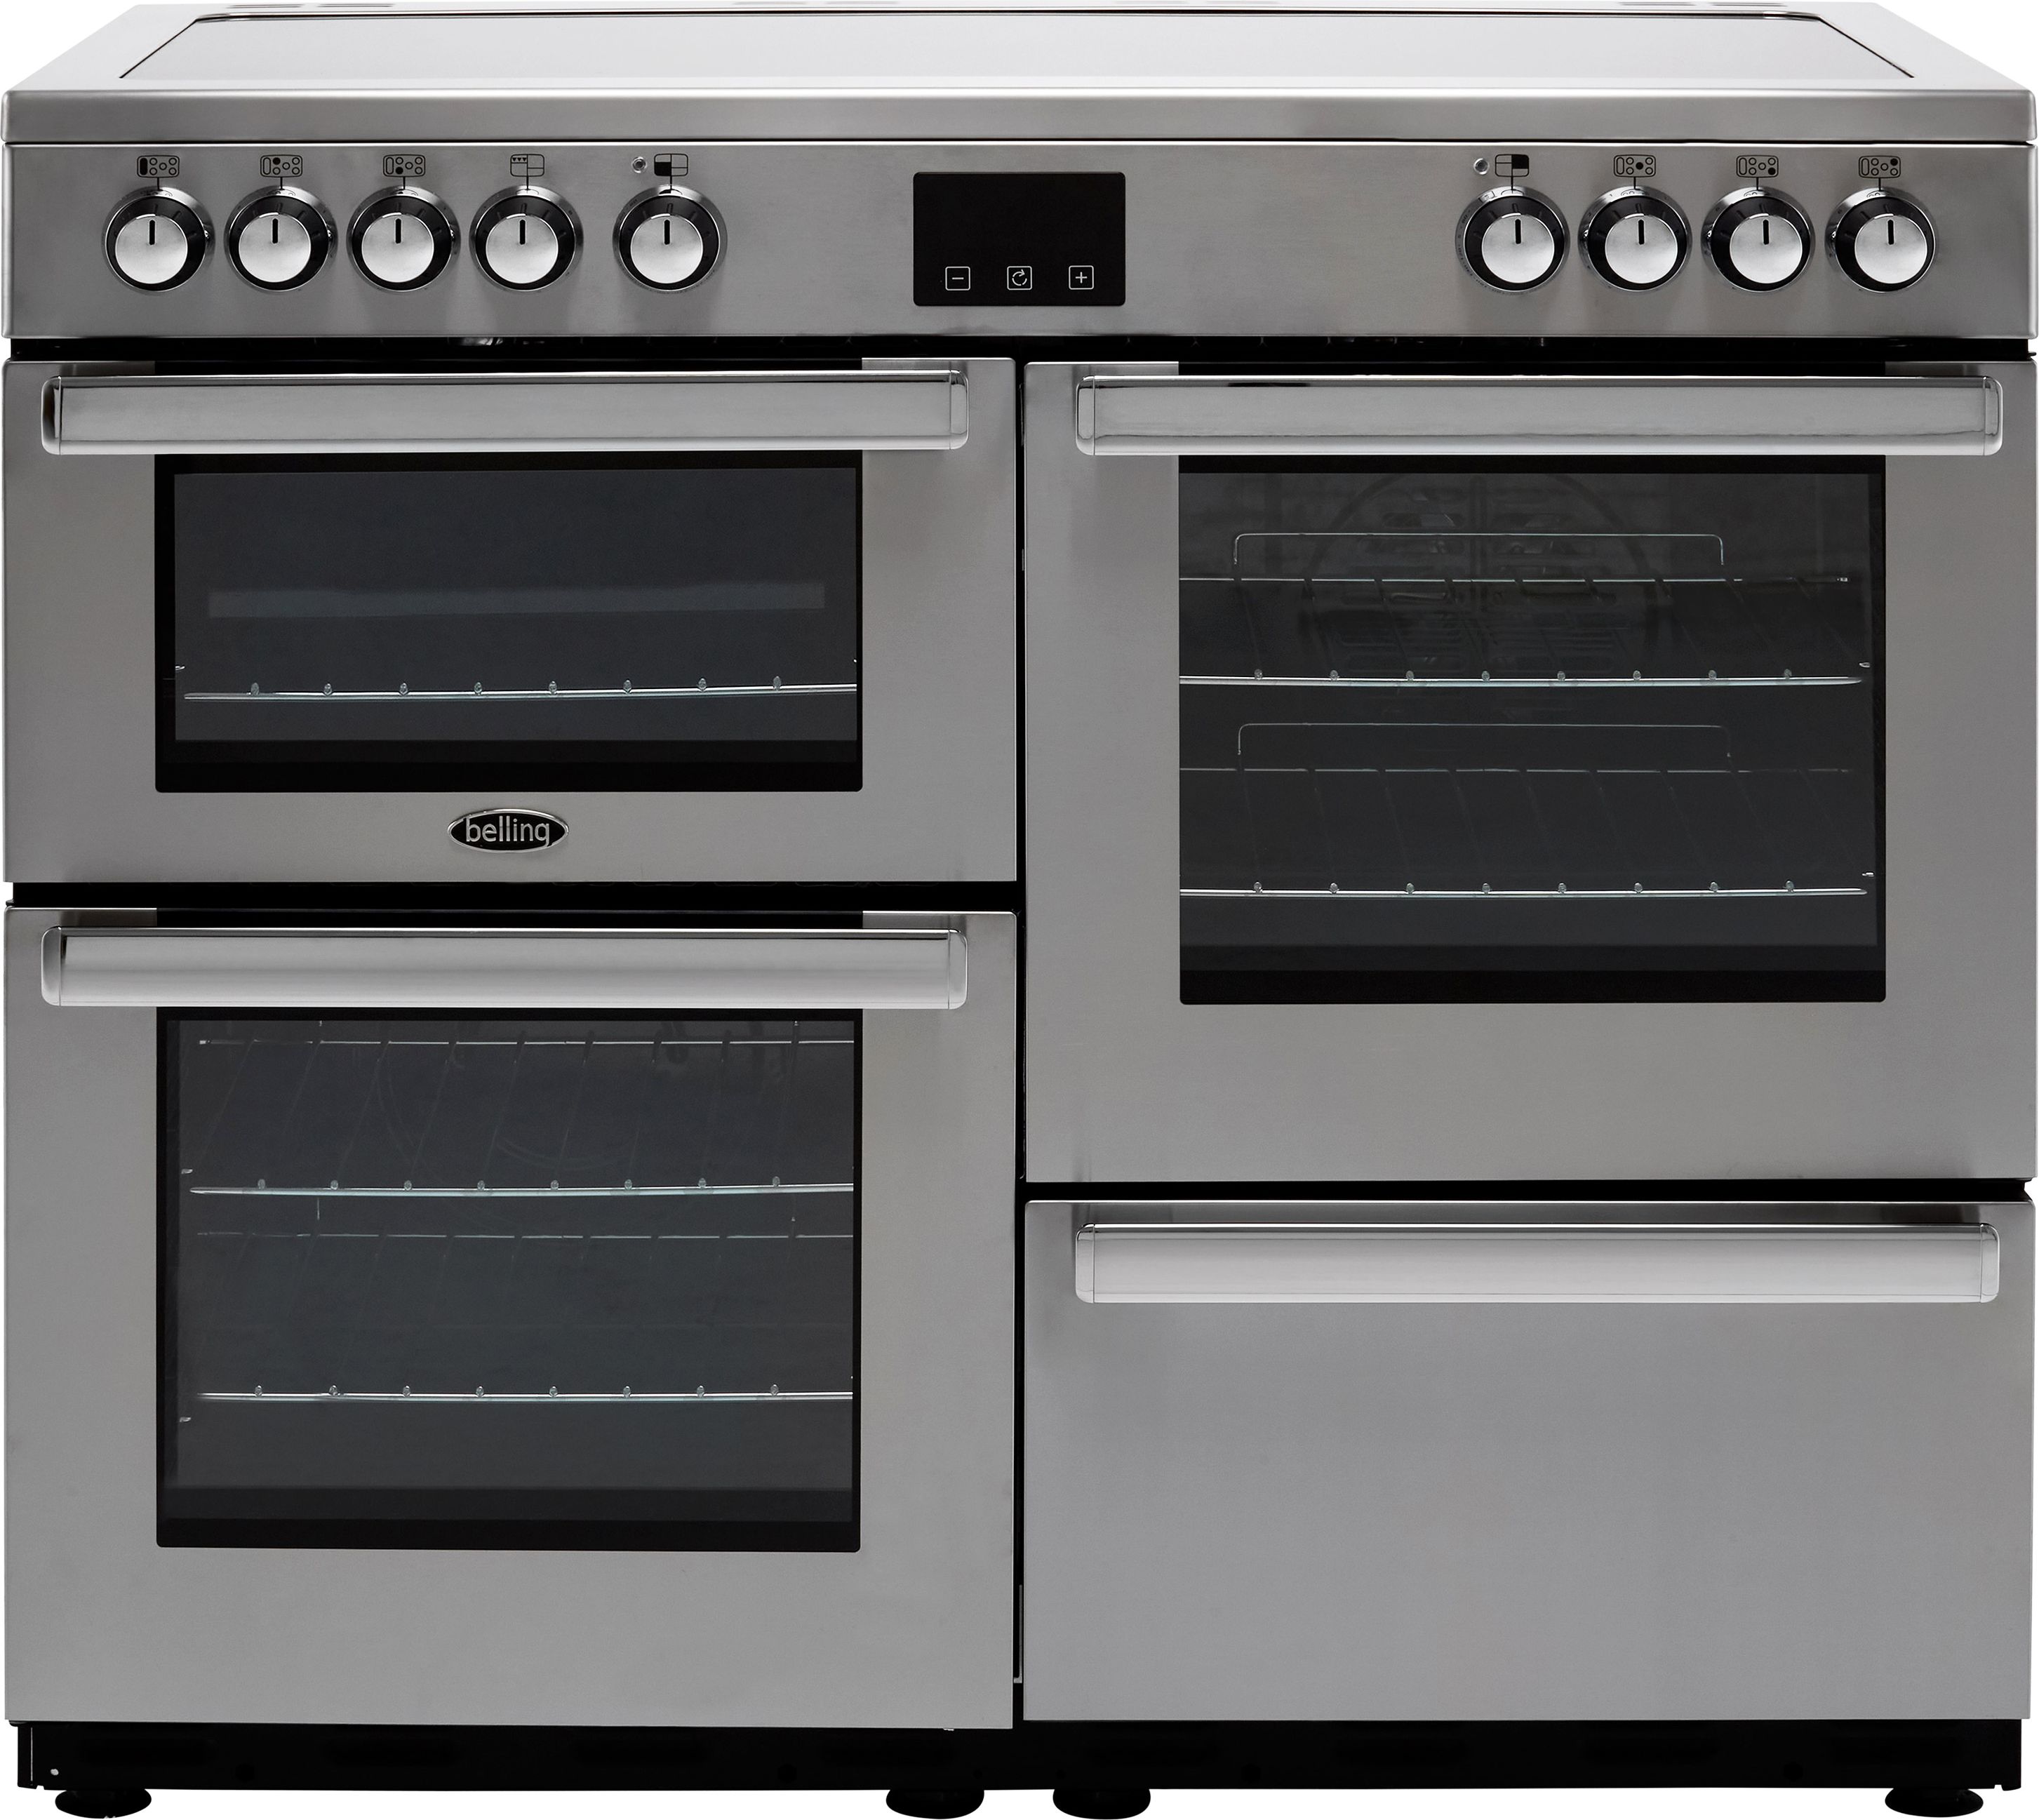 Belling Cookcentre100E Prof 100cm Electric Range Cooker with Ceramic Hob - Stainless Steel - A/A Rated, Stainless Steel